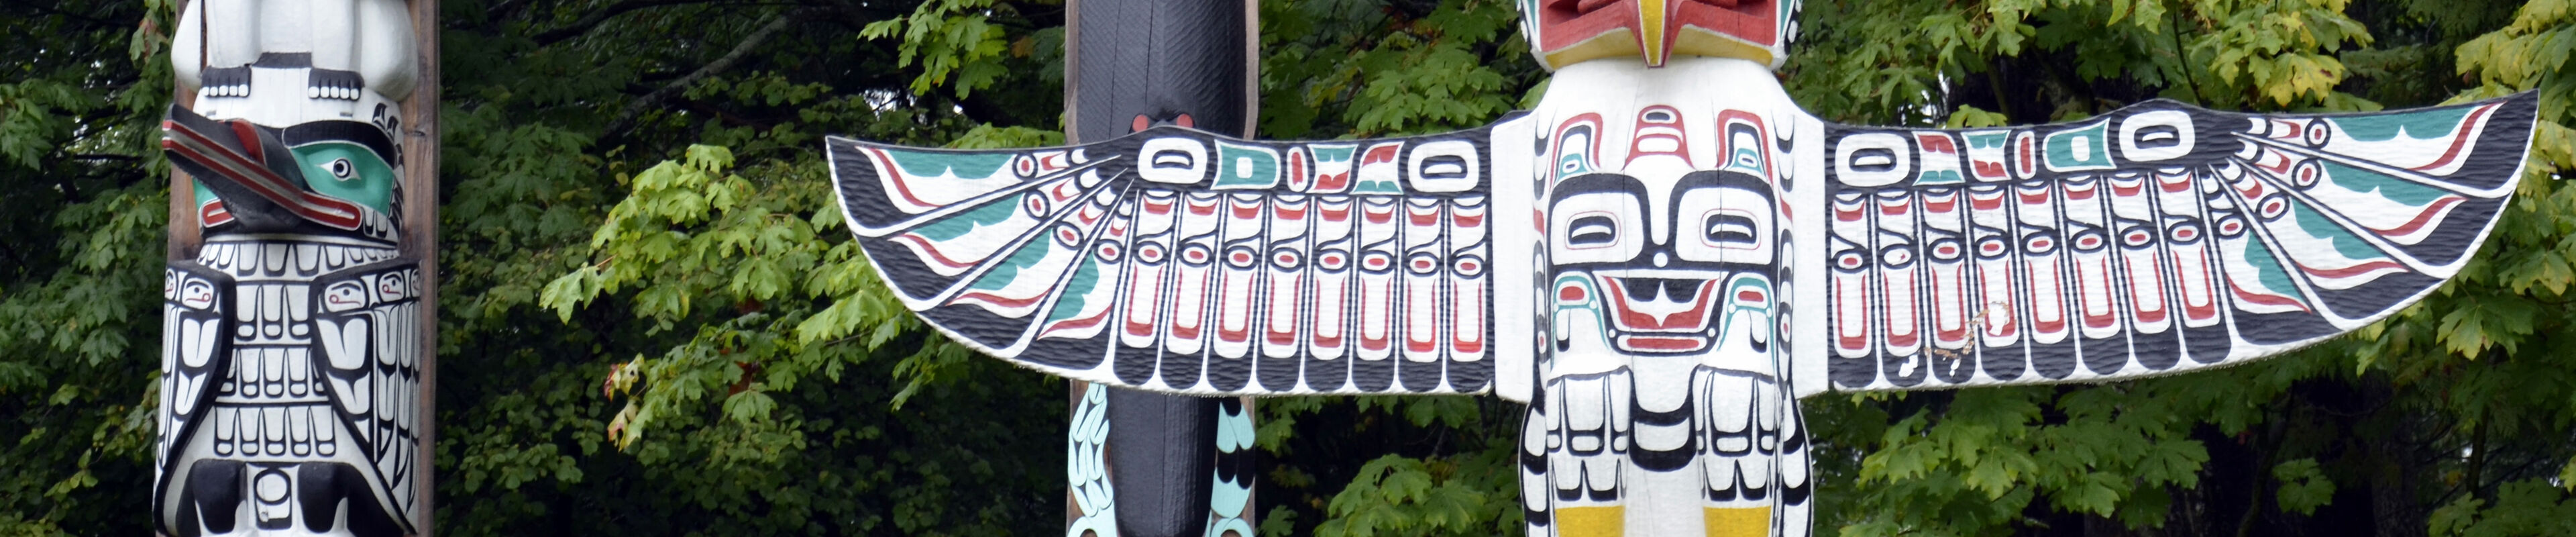 Colorful totem poles adorned with traditional indigenous carvings stand before a backdrop of dense green foliage.